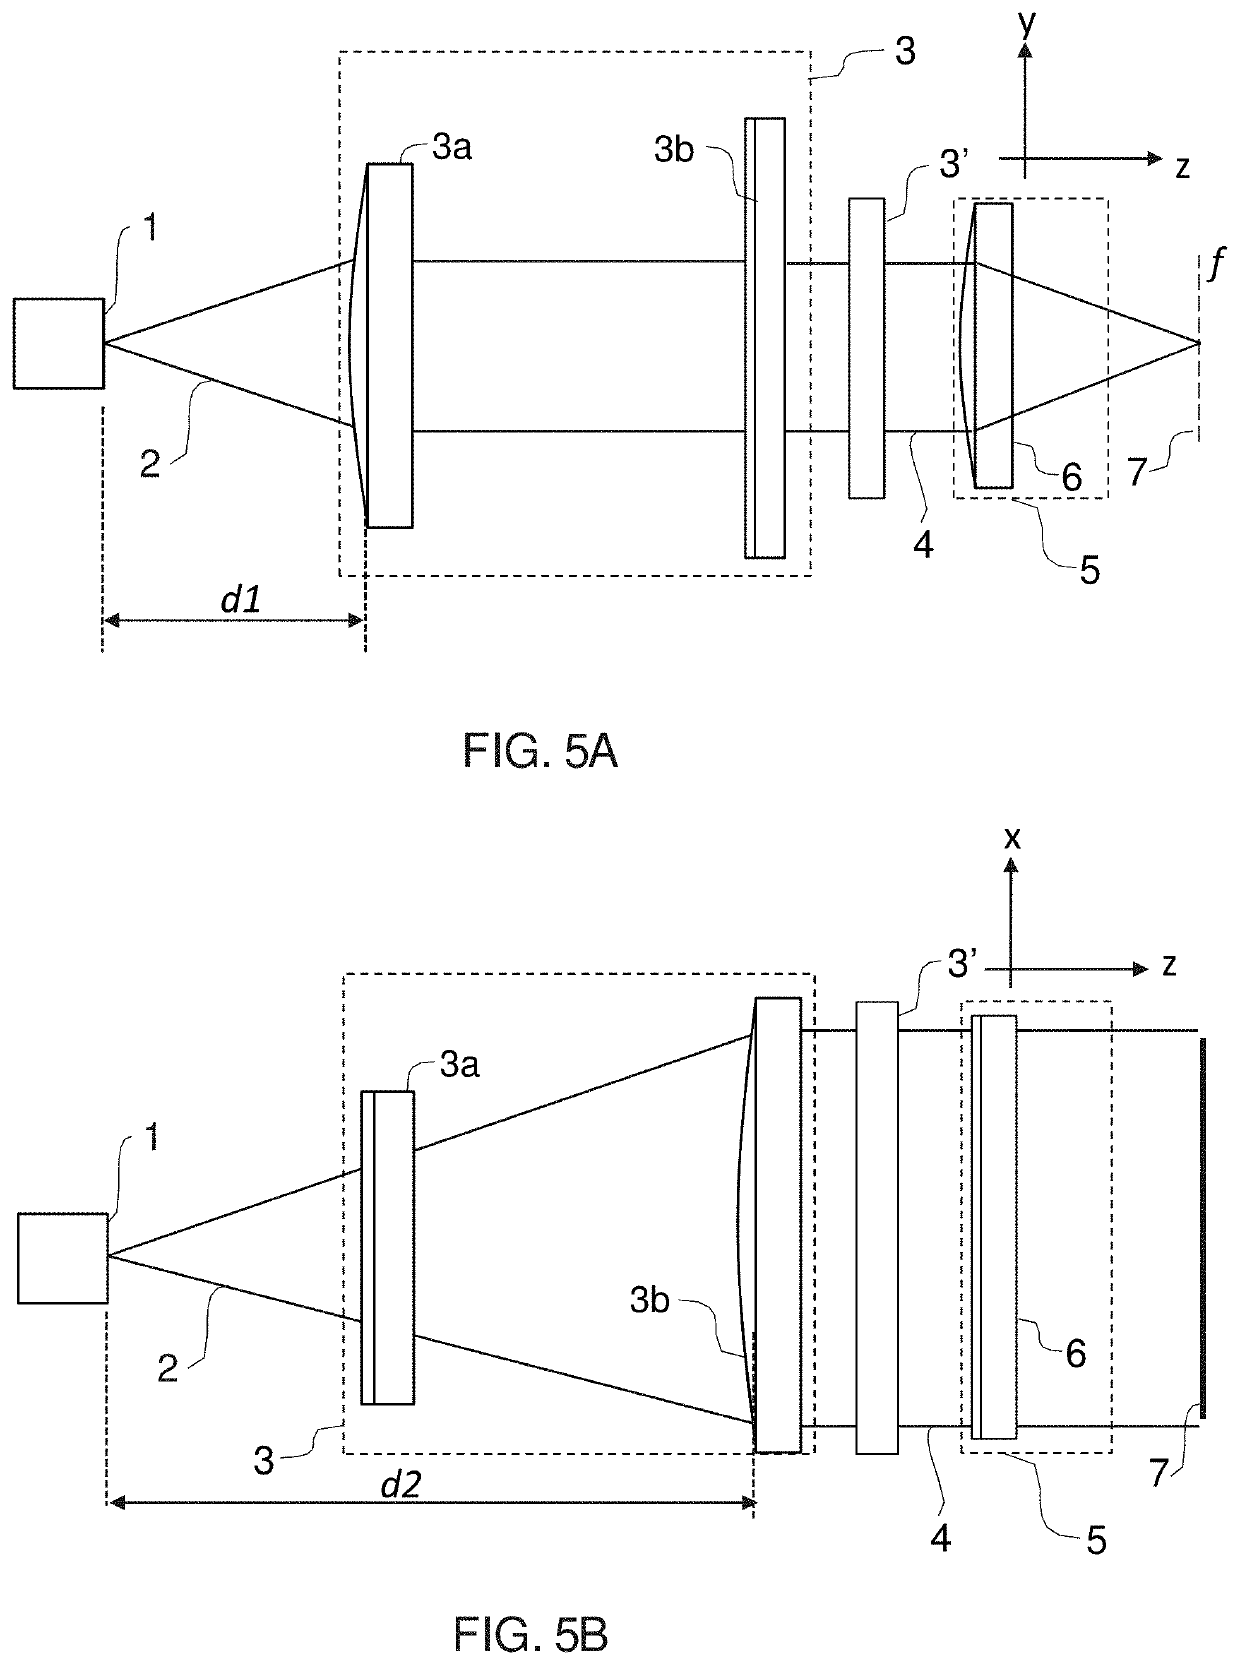 Source Module and Optical System For Line-Field Imaging